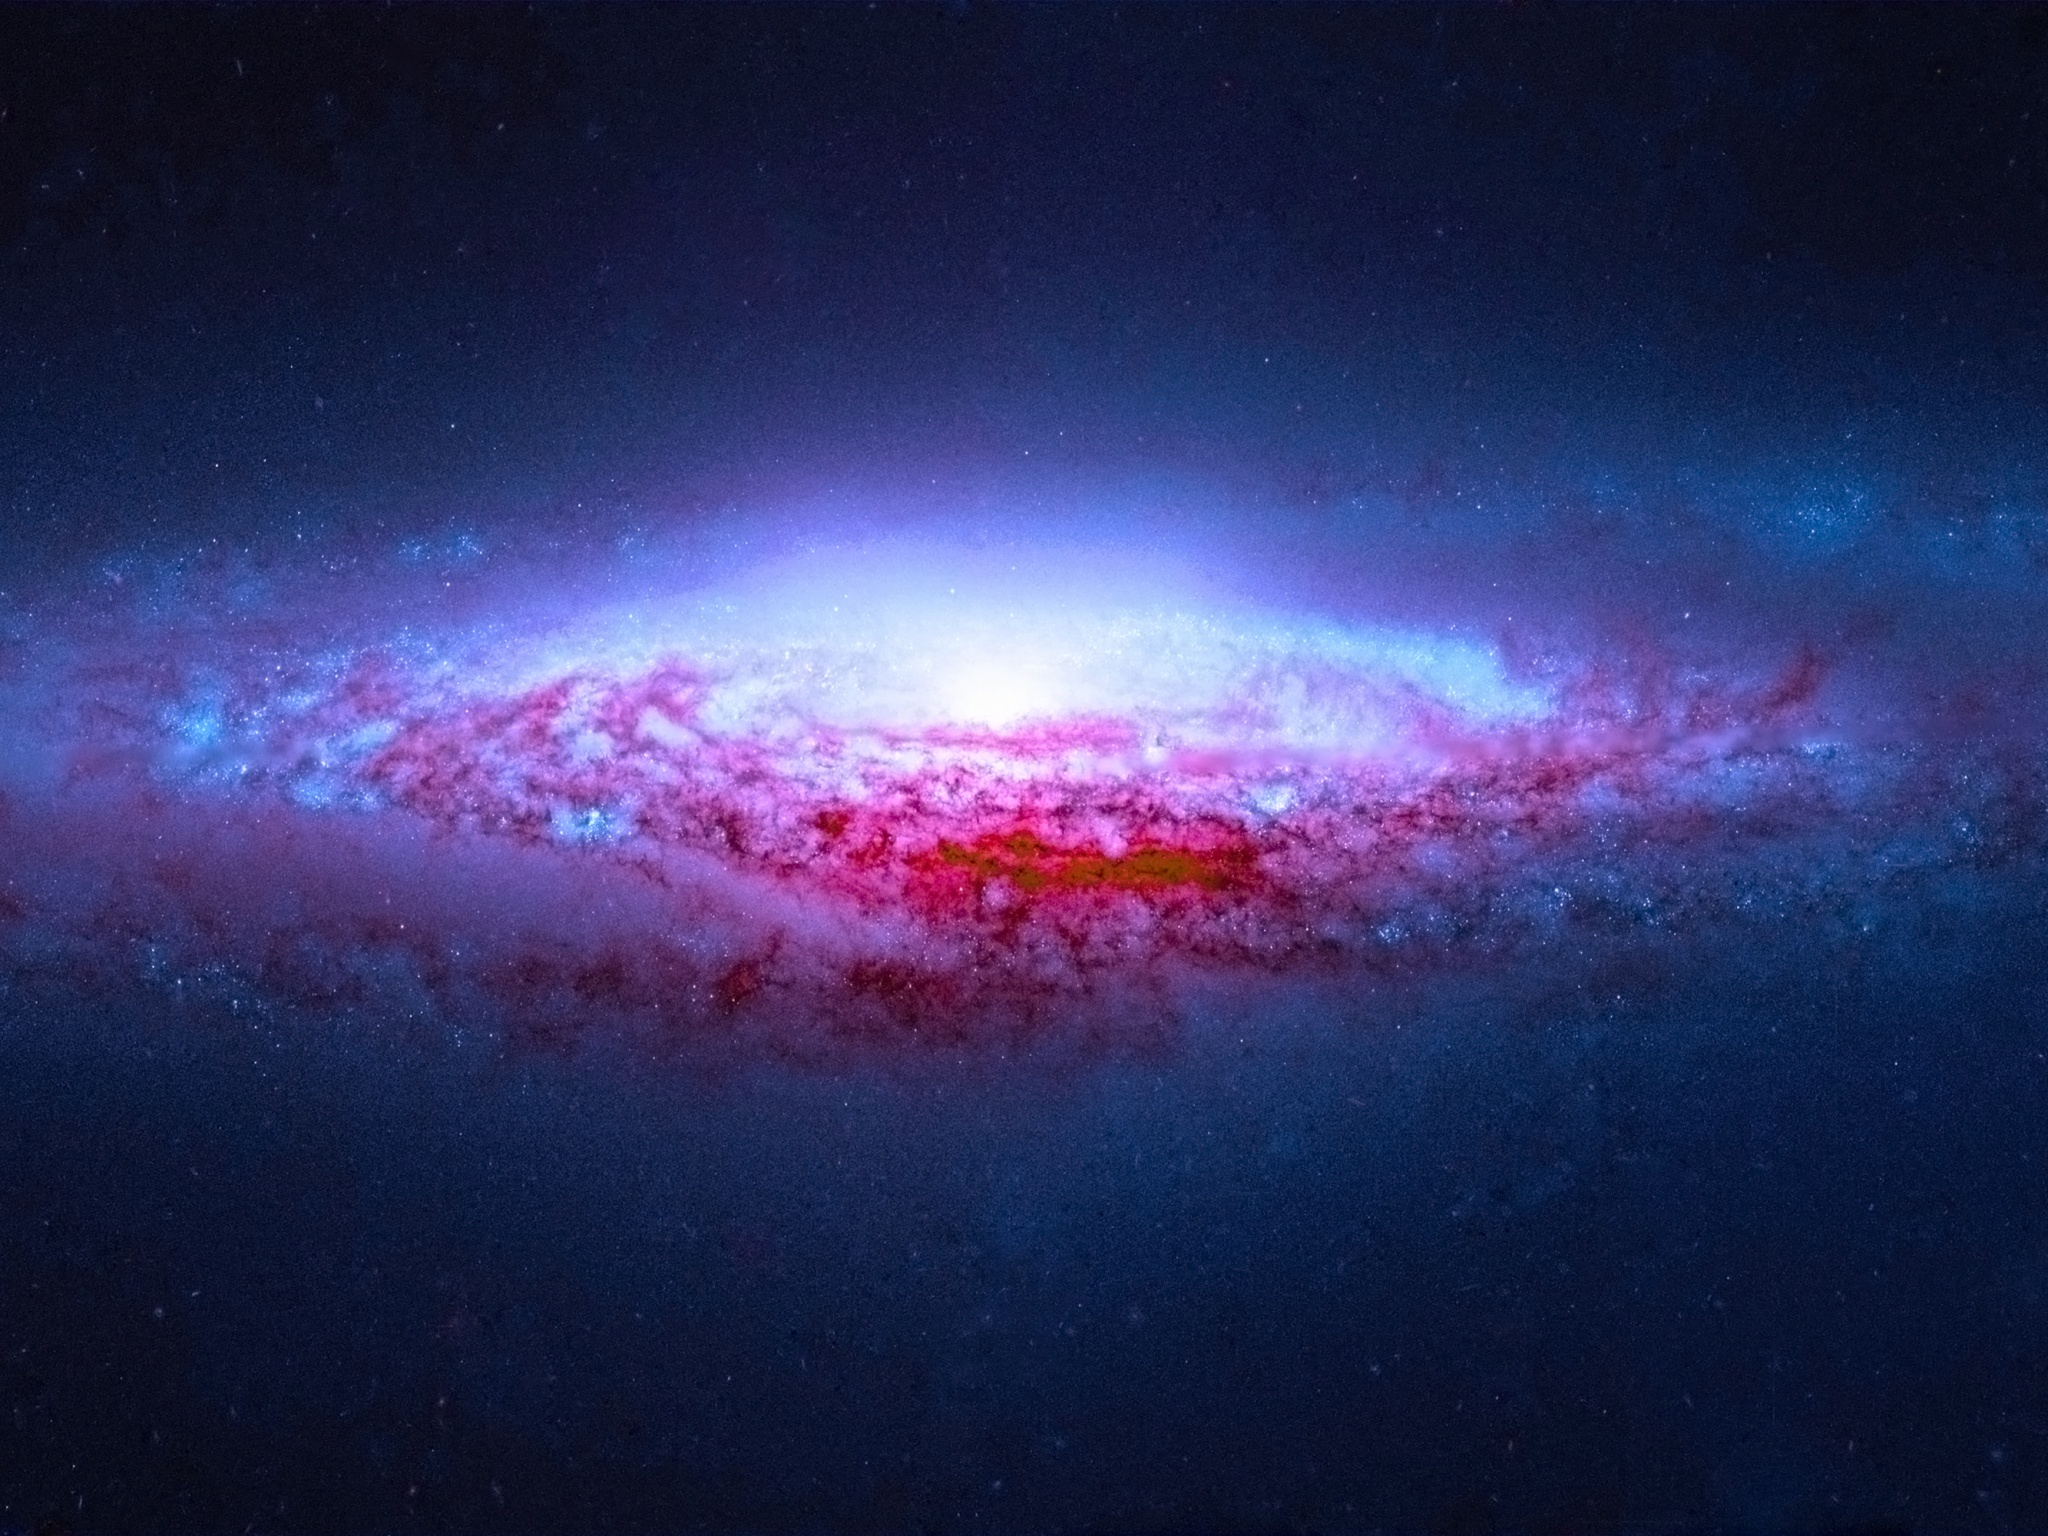 Spiral galaxy Wallpaper 4K, Astronomy, Universe, Colorful, Vivid, Space